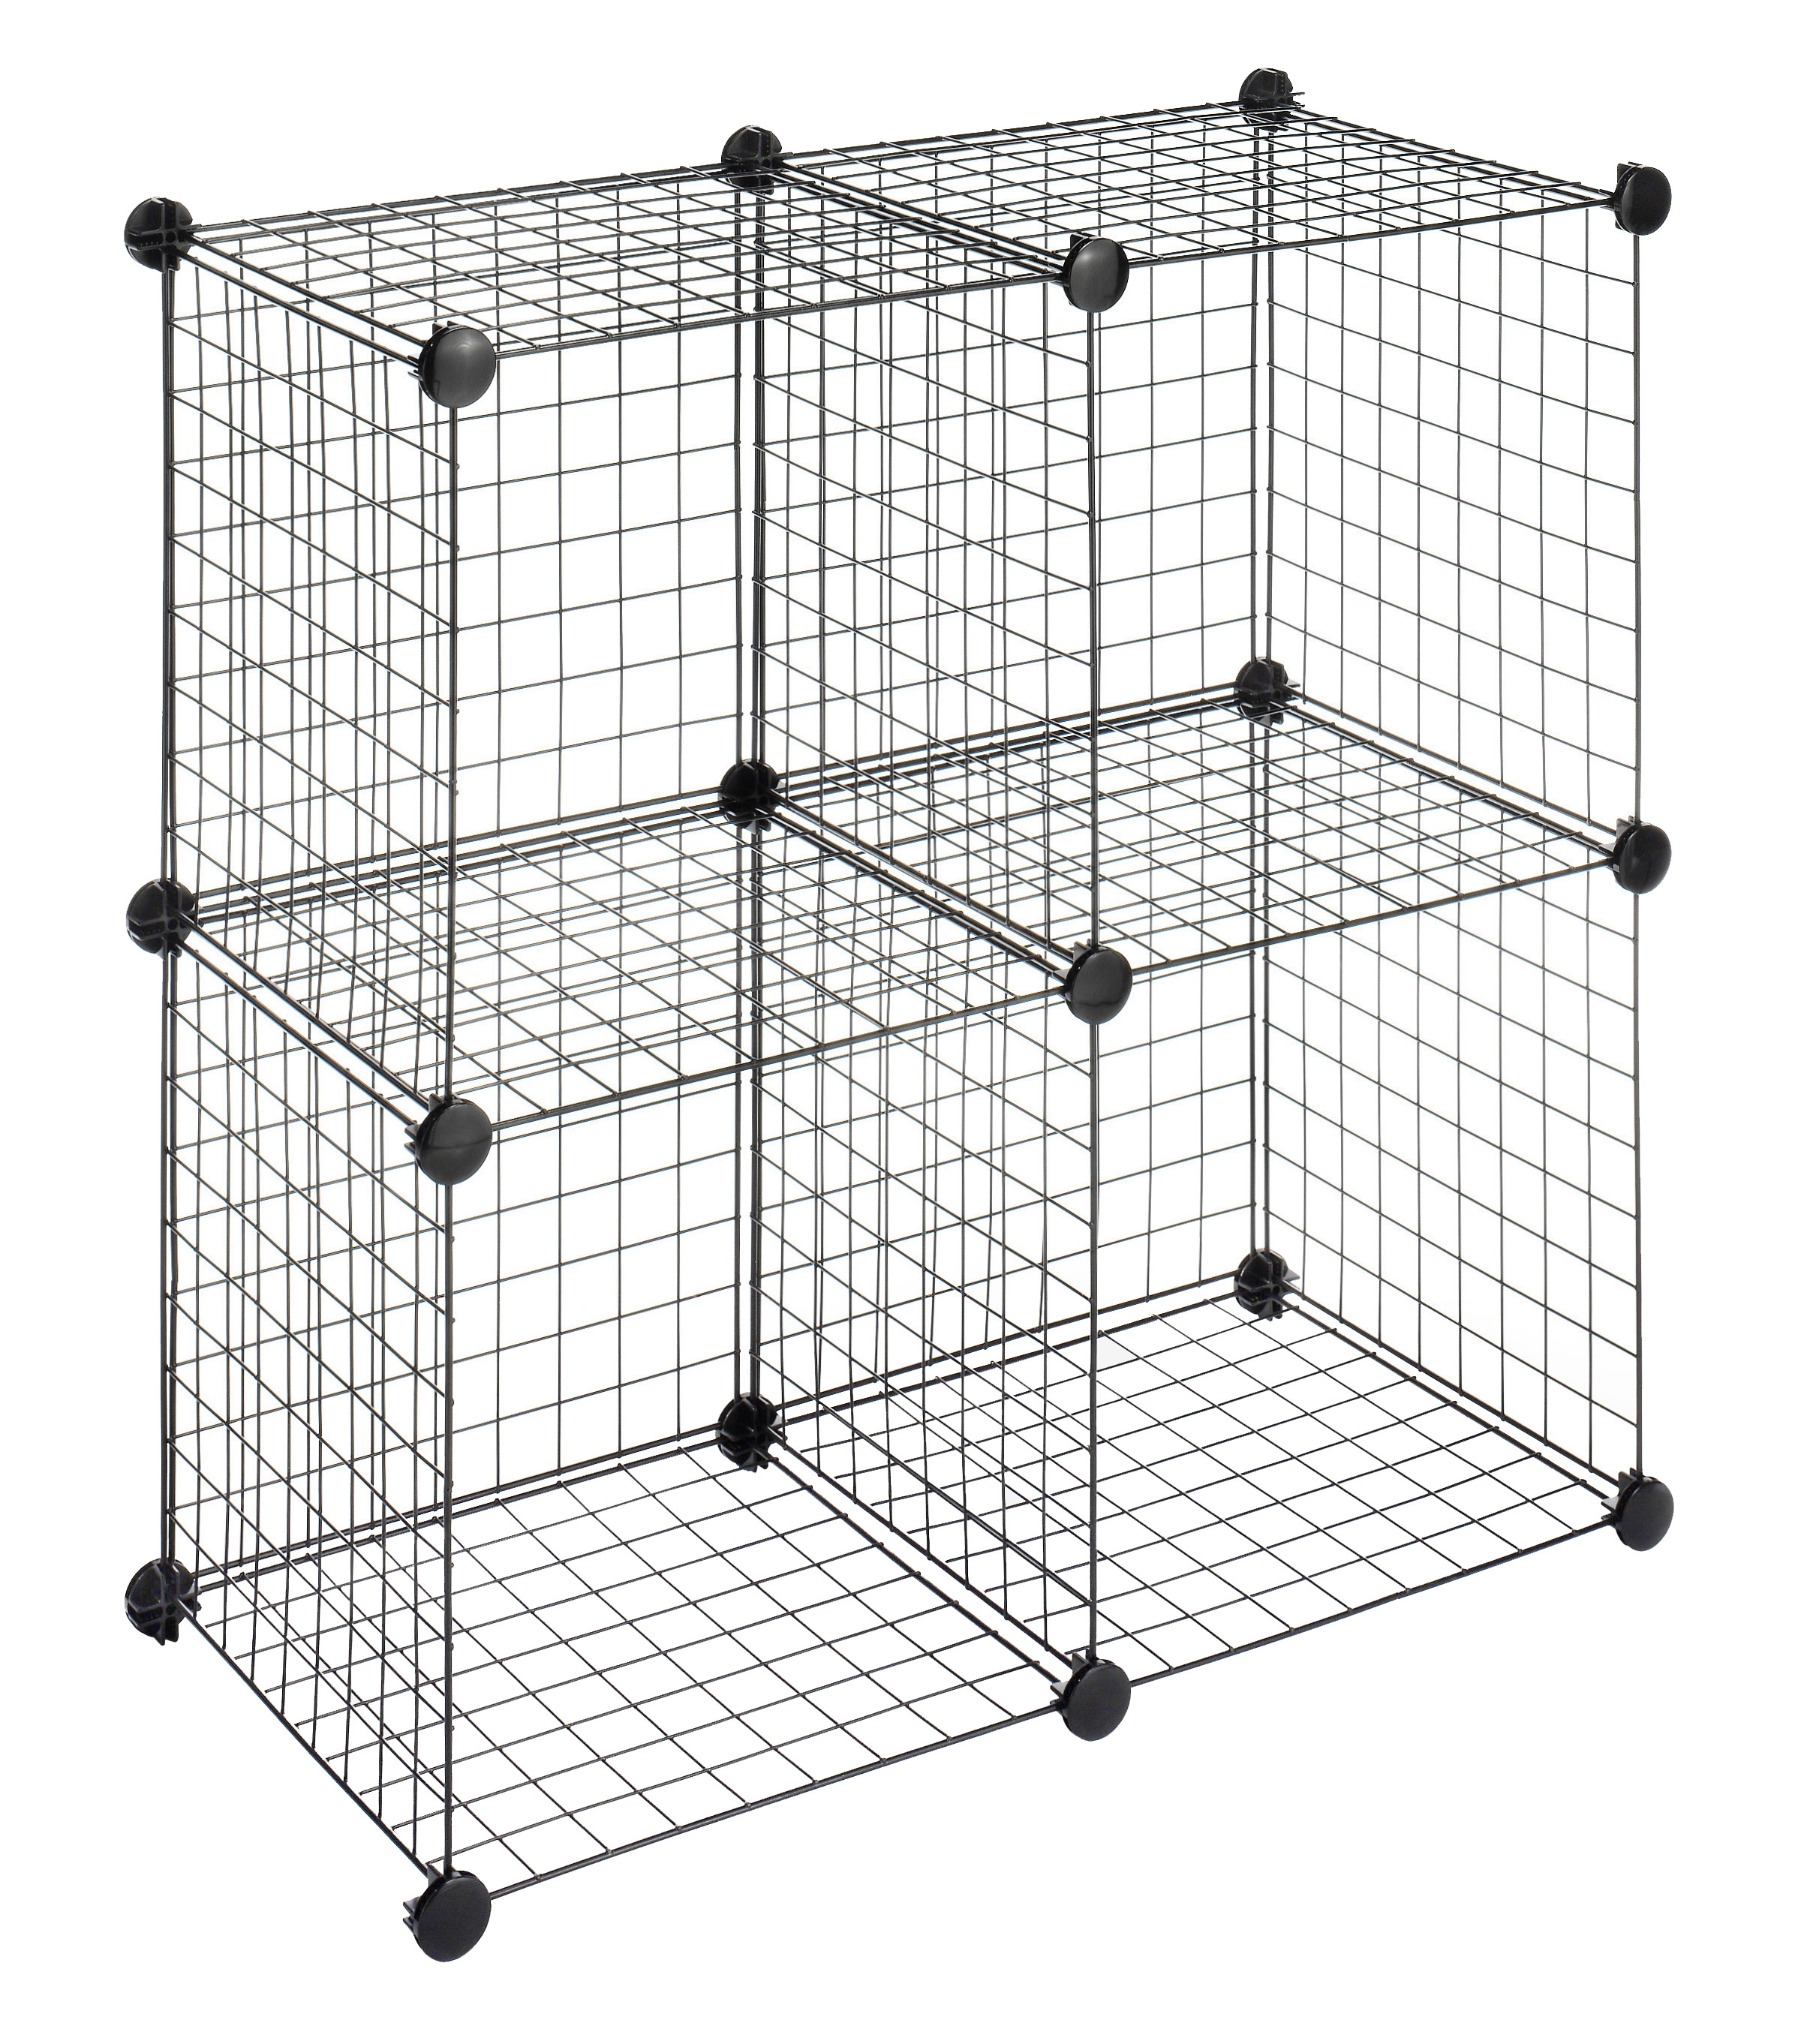 Whitmor Storage Cubes Stackable Interlocking Wire Shelves Set of 4 Black 14.25 x 14.5x  14.5 - image 1 of 12